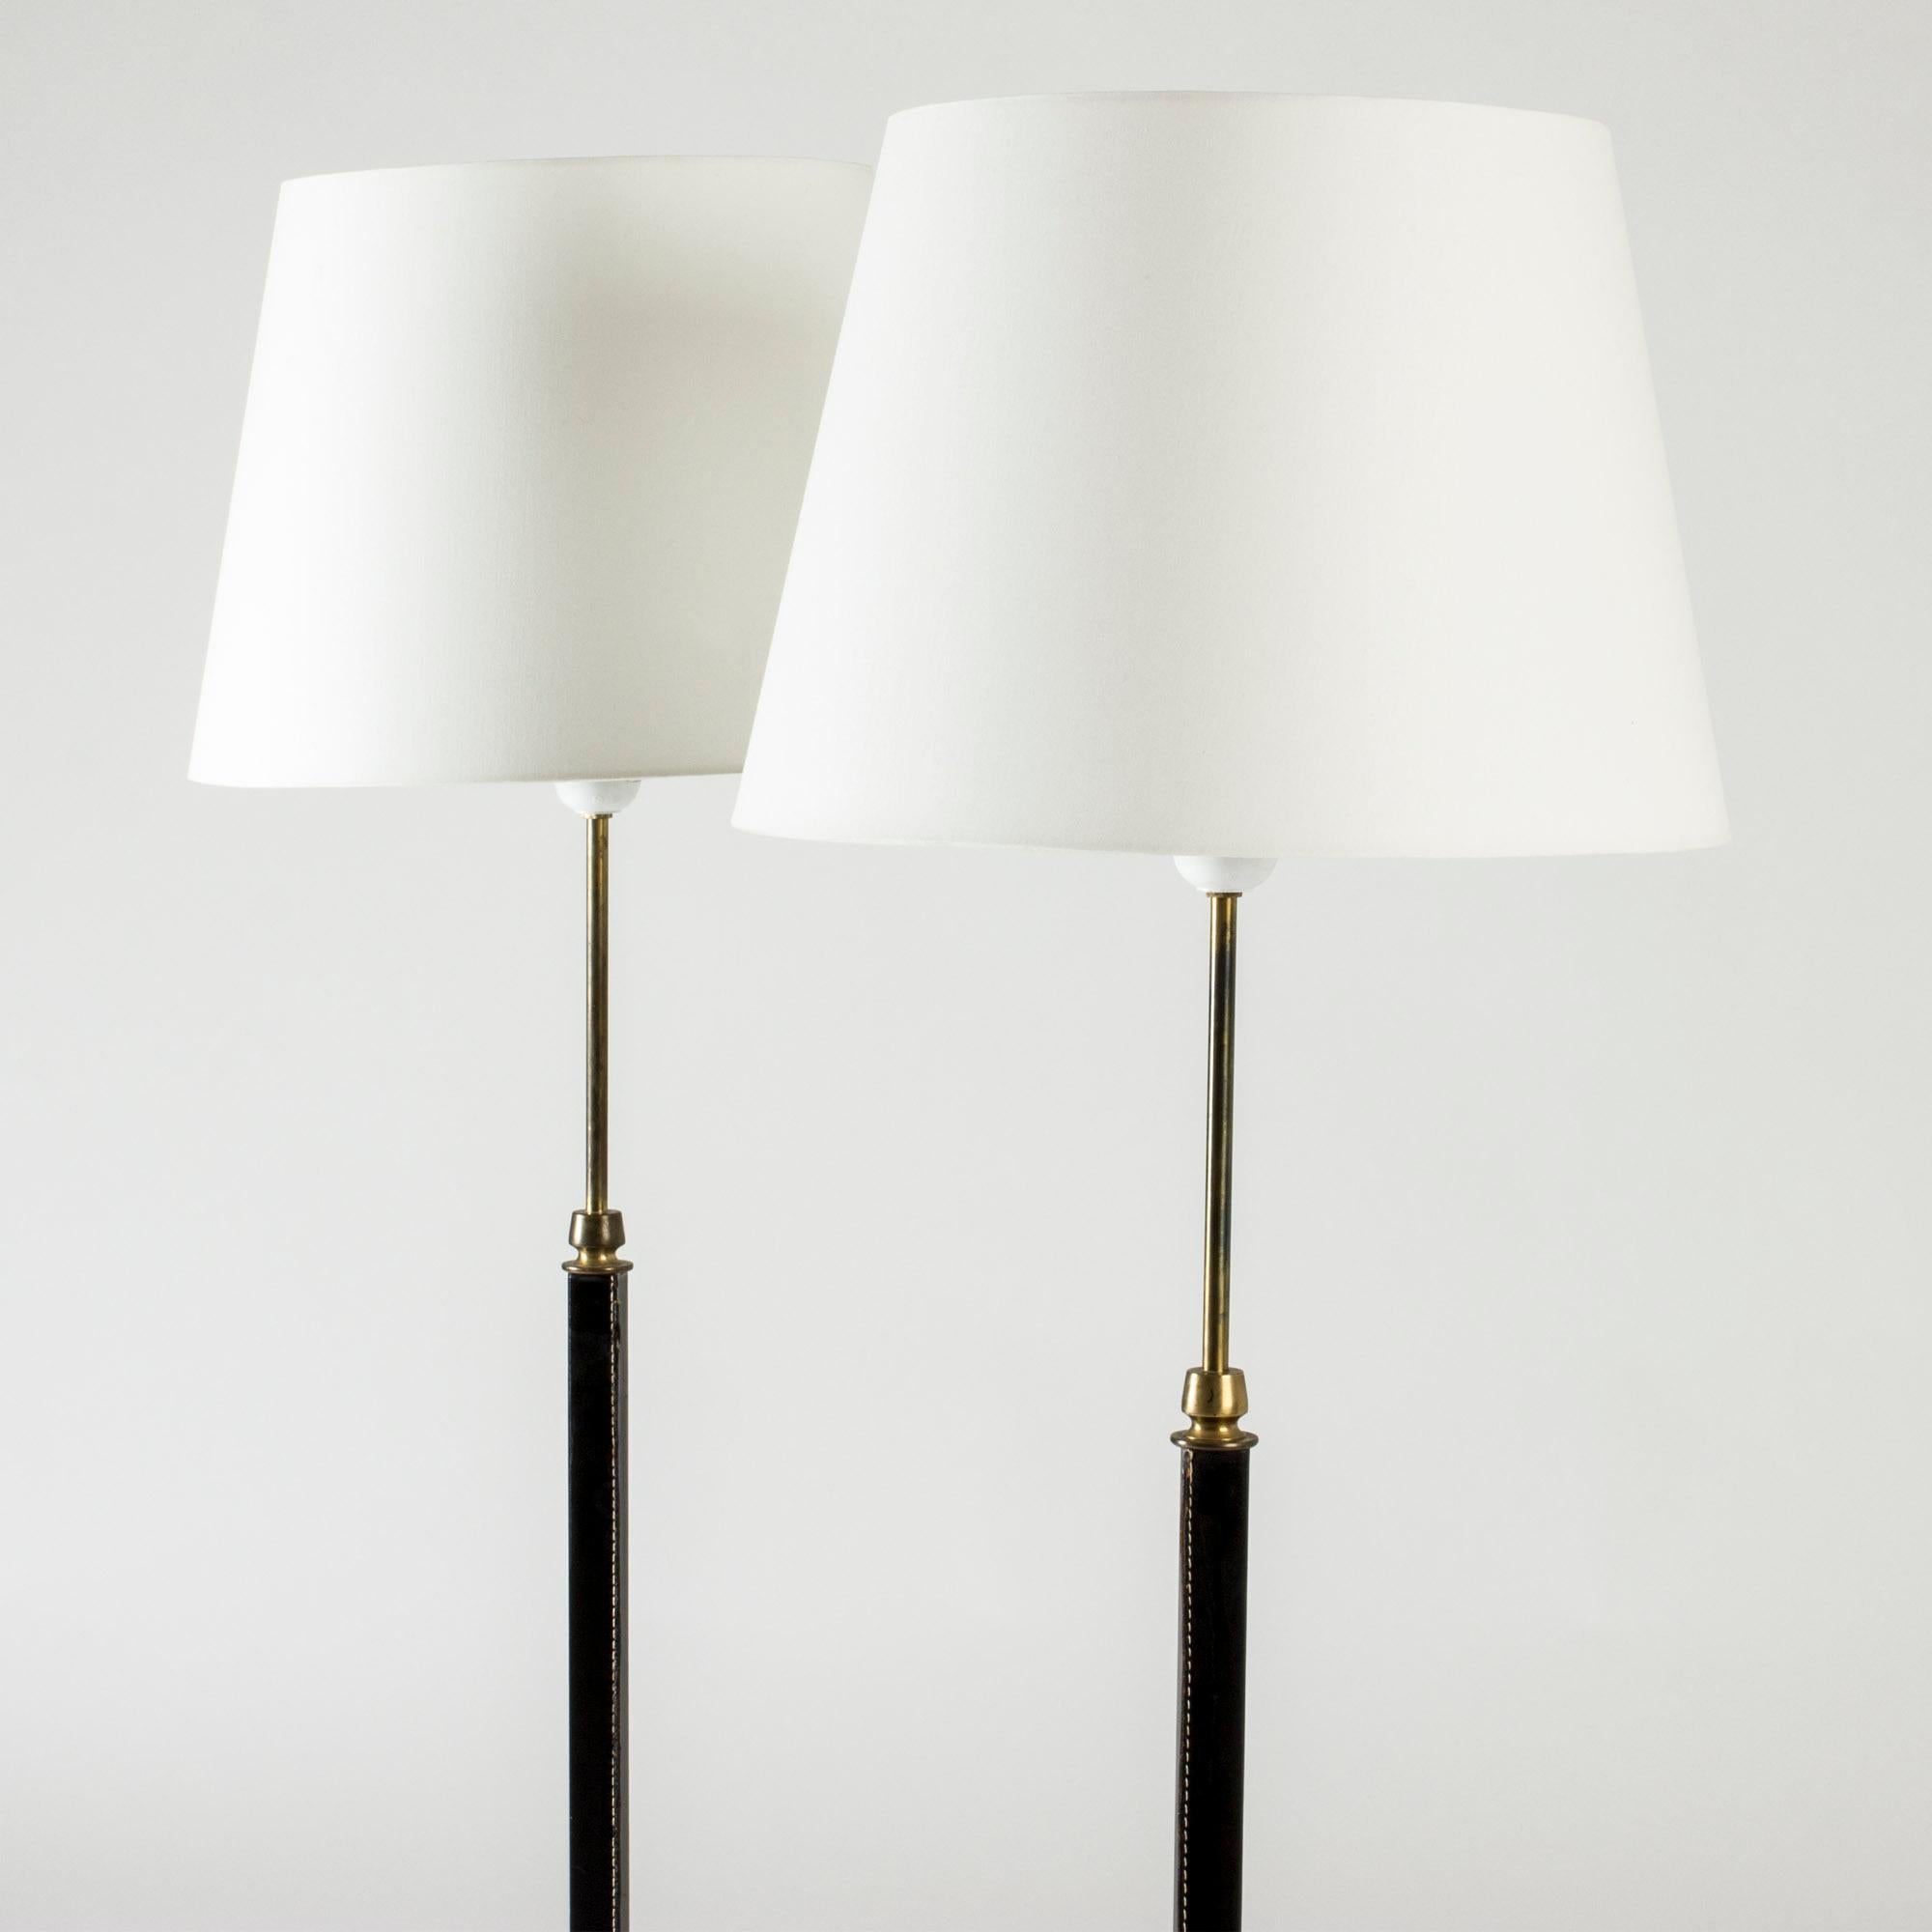 Swedish Pair of Floor Lamps from Falkenbergs Belysning, Sweden, 1960s For Sale